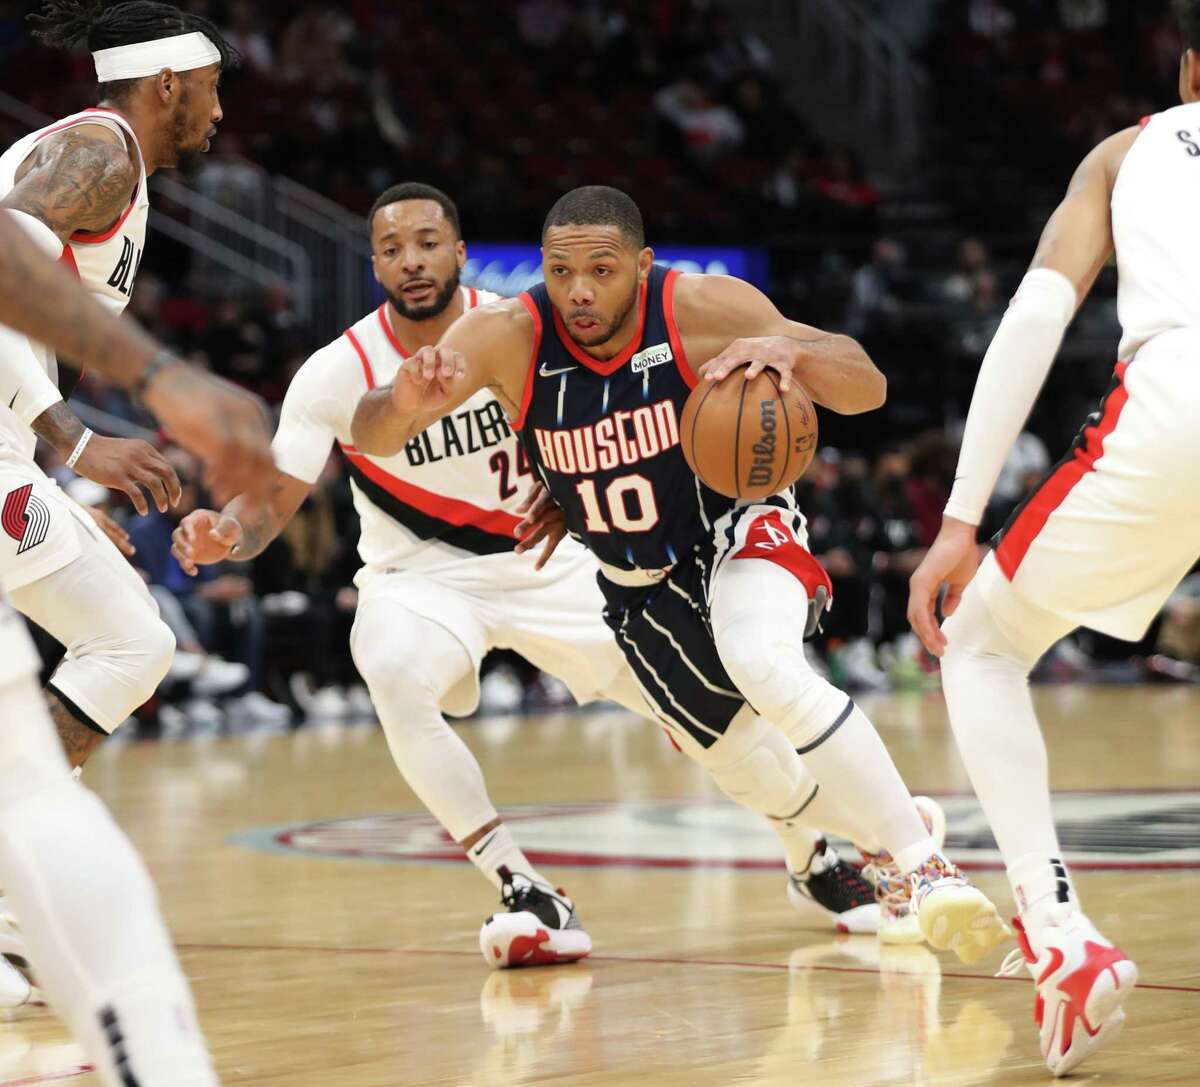 Eric Gordon has another year on his contract in Houston so the Rockets aren’t in a hurry to move him.